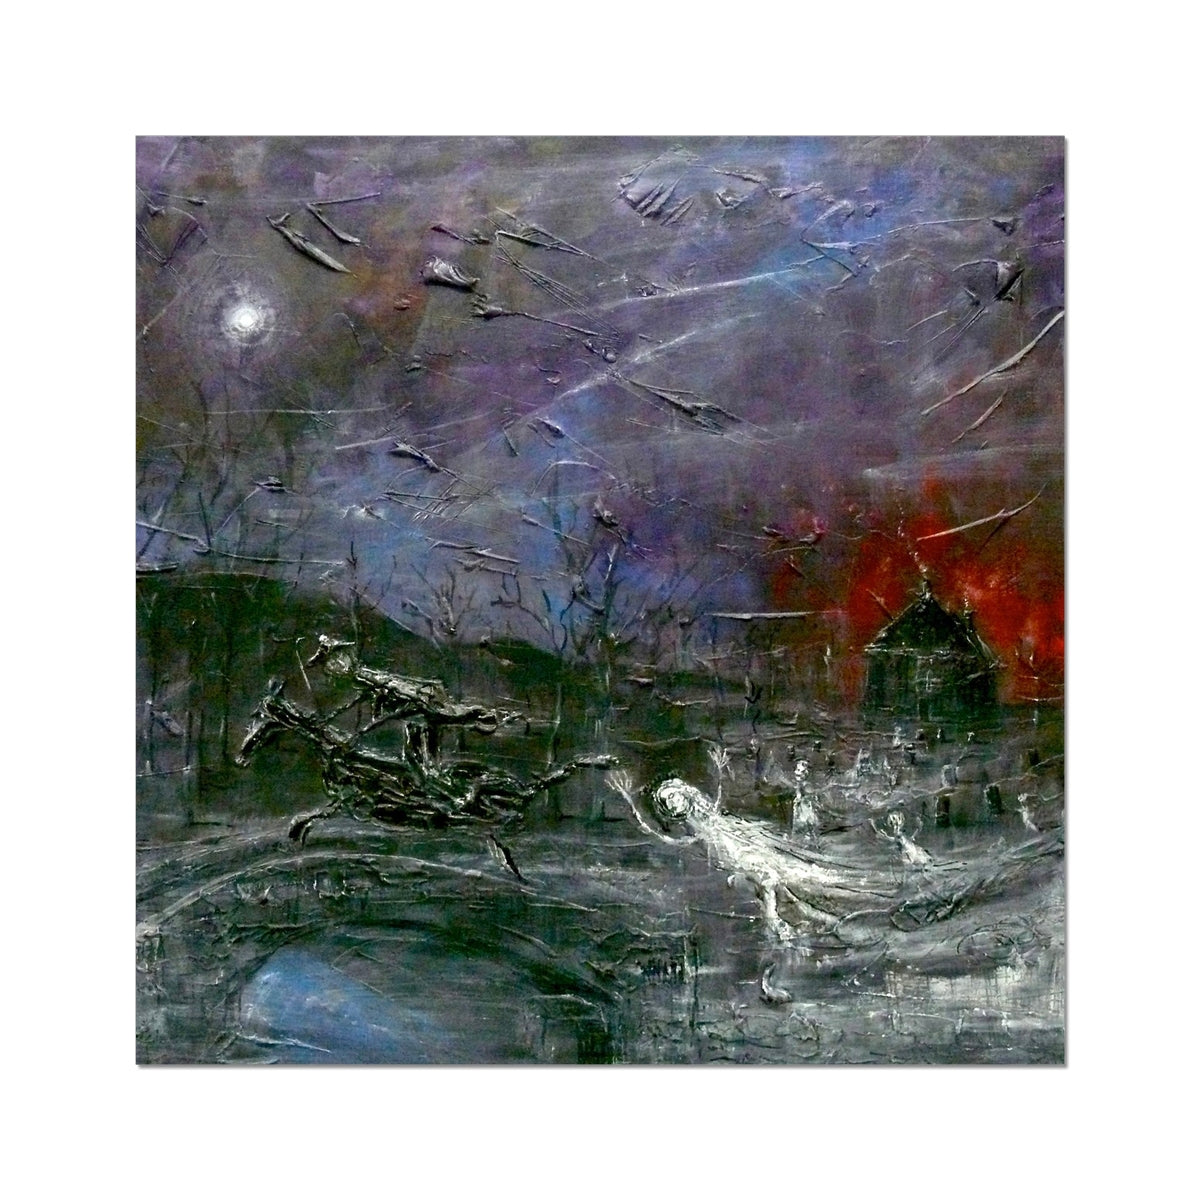 Tam O Shanter Painting | Fine Art Prints From Scotland-Unframed Prints-Abstract & Impressionistic Art Gallery-24"x24"-Paintings, Prints, Homeware, Art Gifts From Scotland By Scottish Artist Kevin Hunter